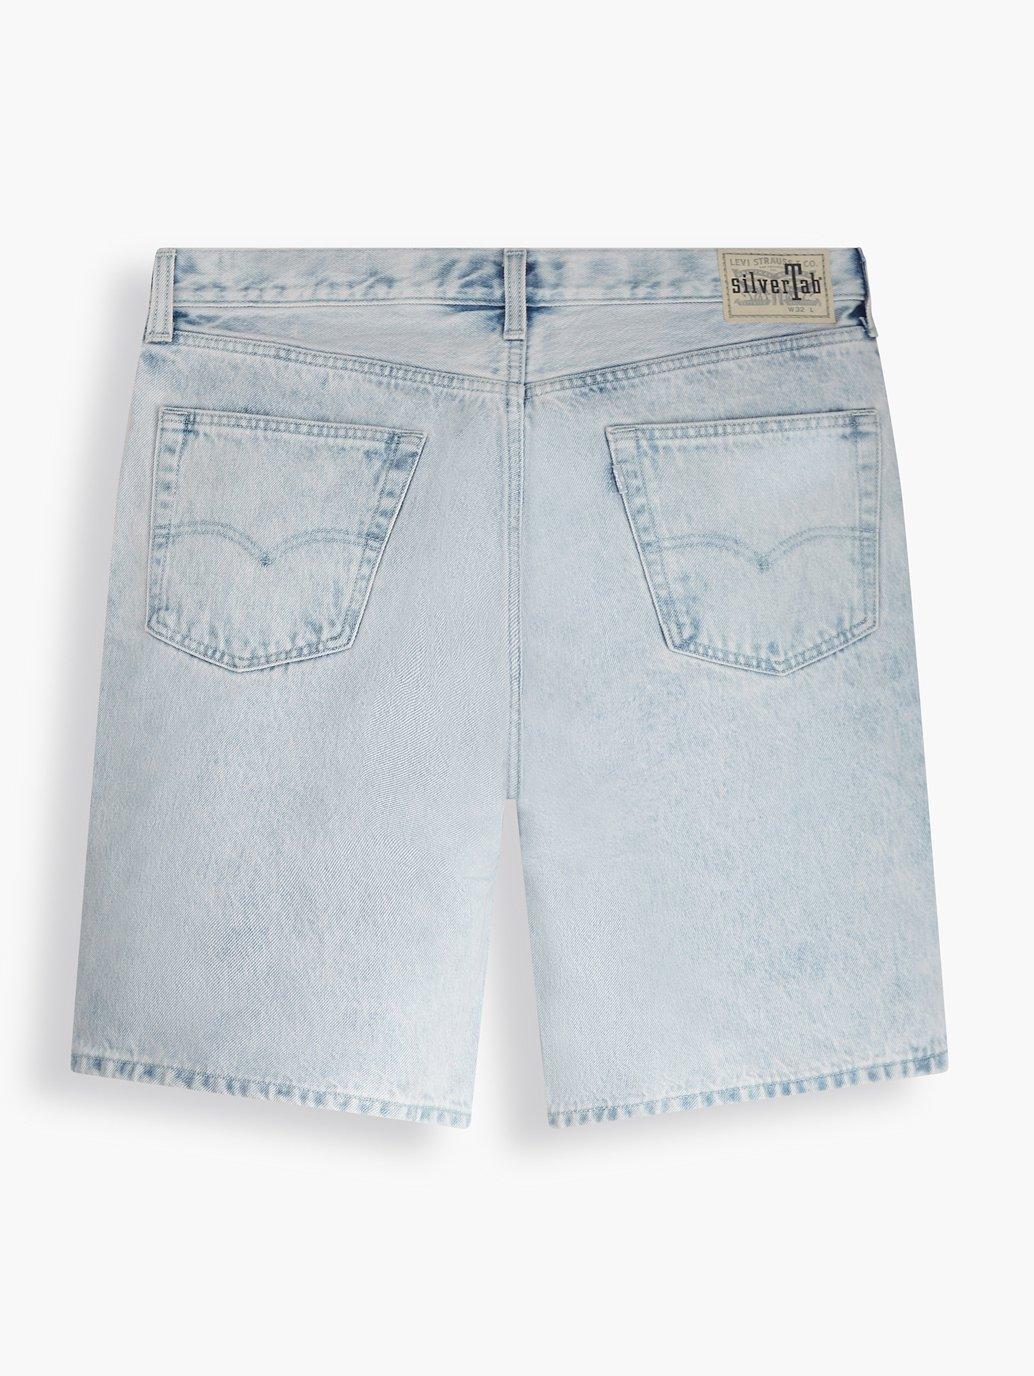 Buy Levi's® Men's SilverTab Loose Shorts | Levi's® Official Online Store PH